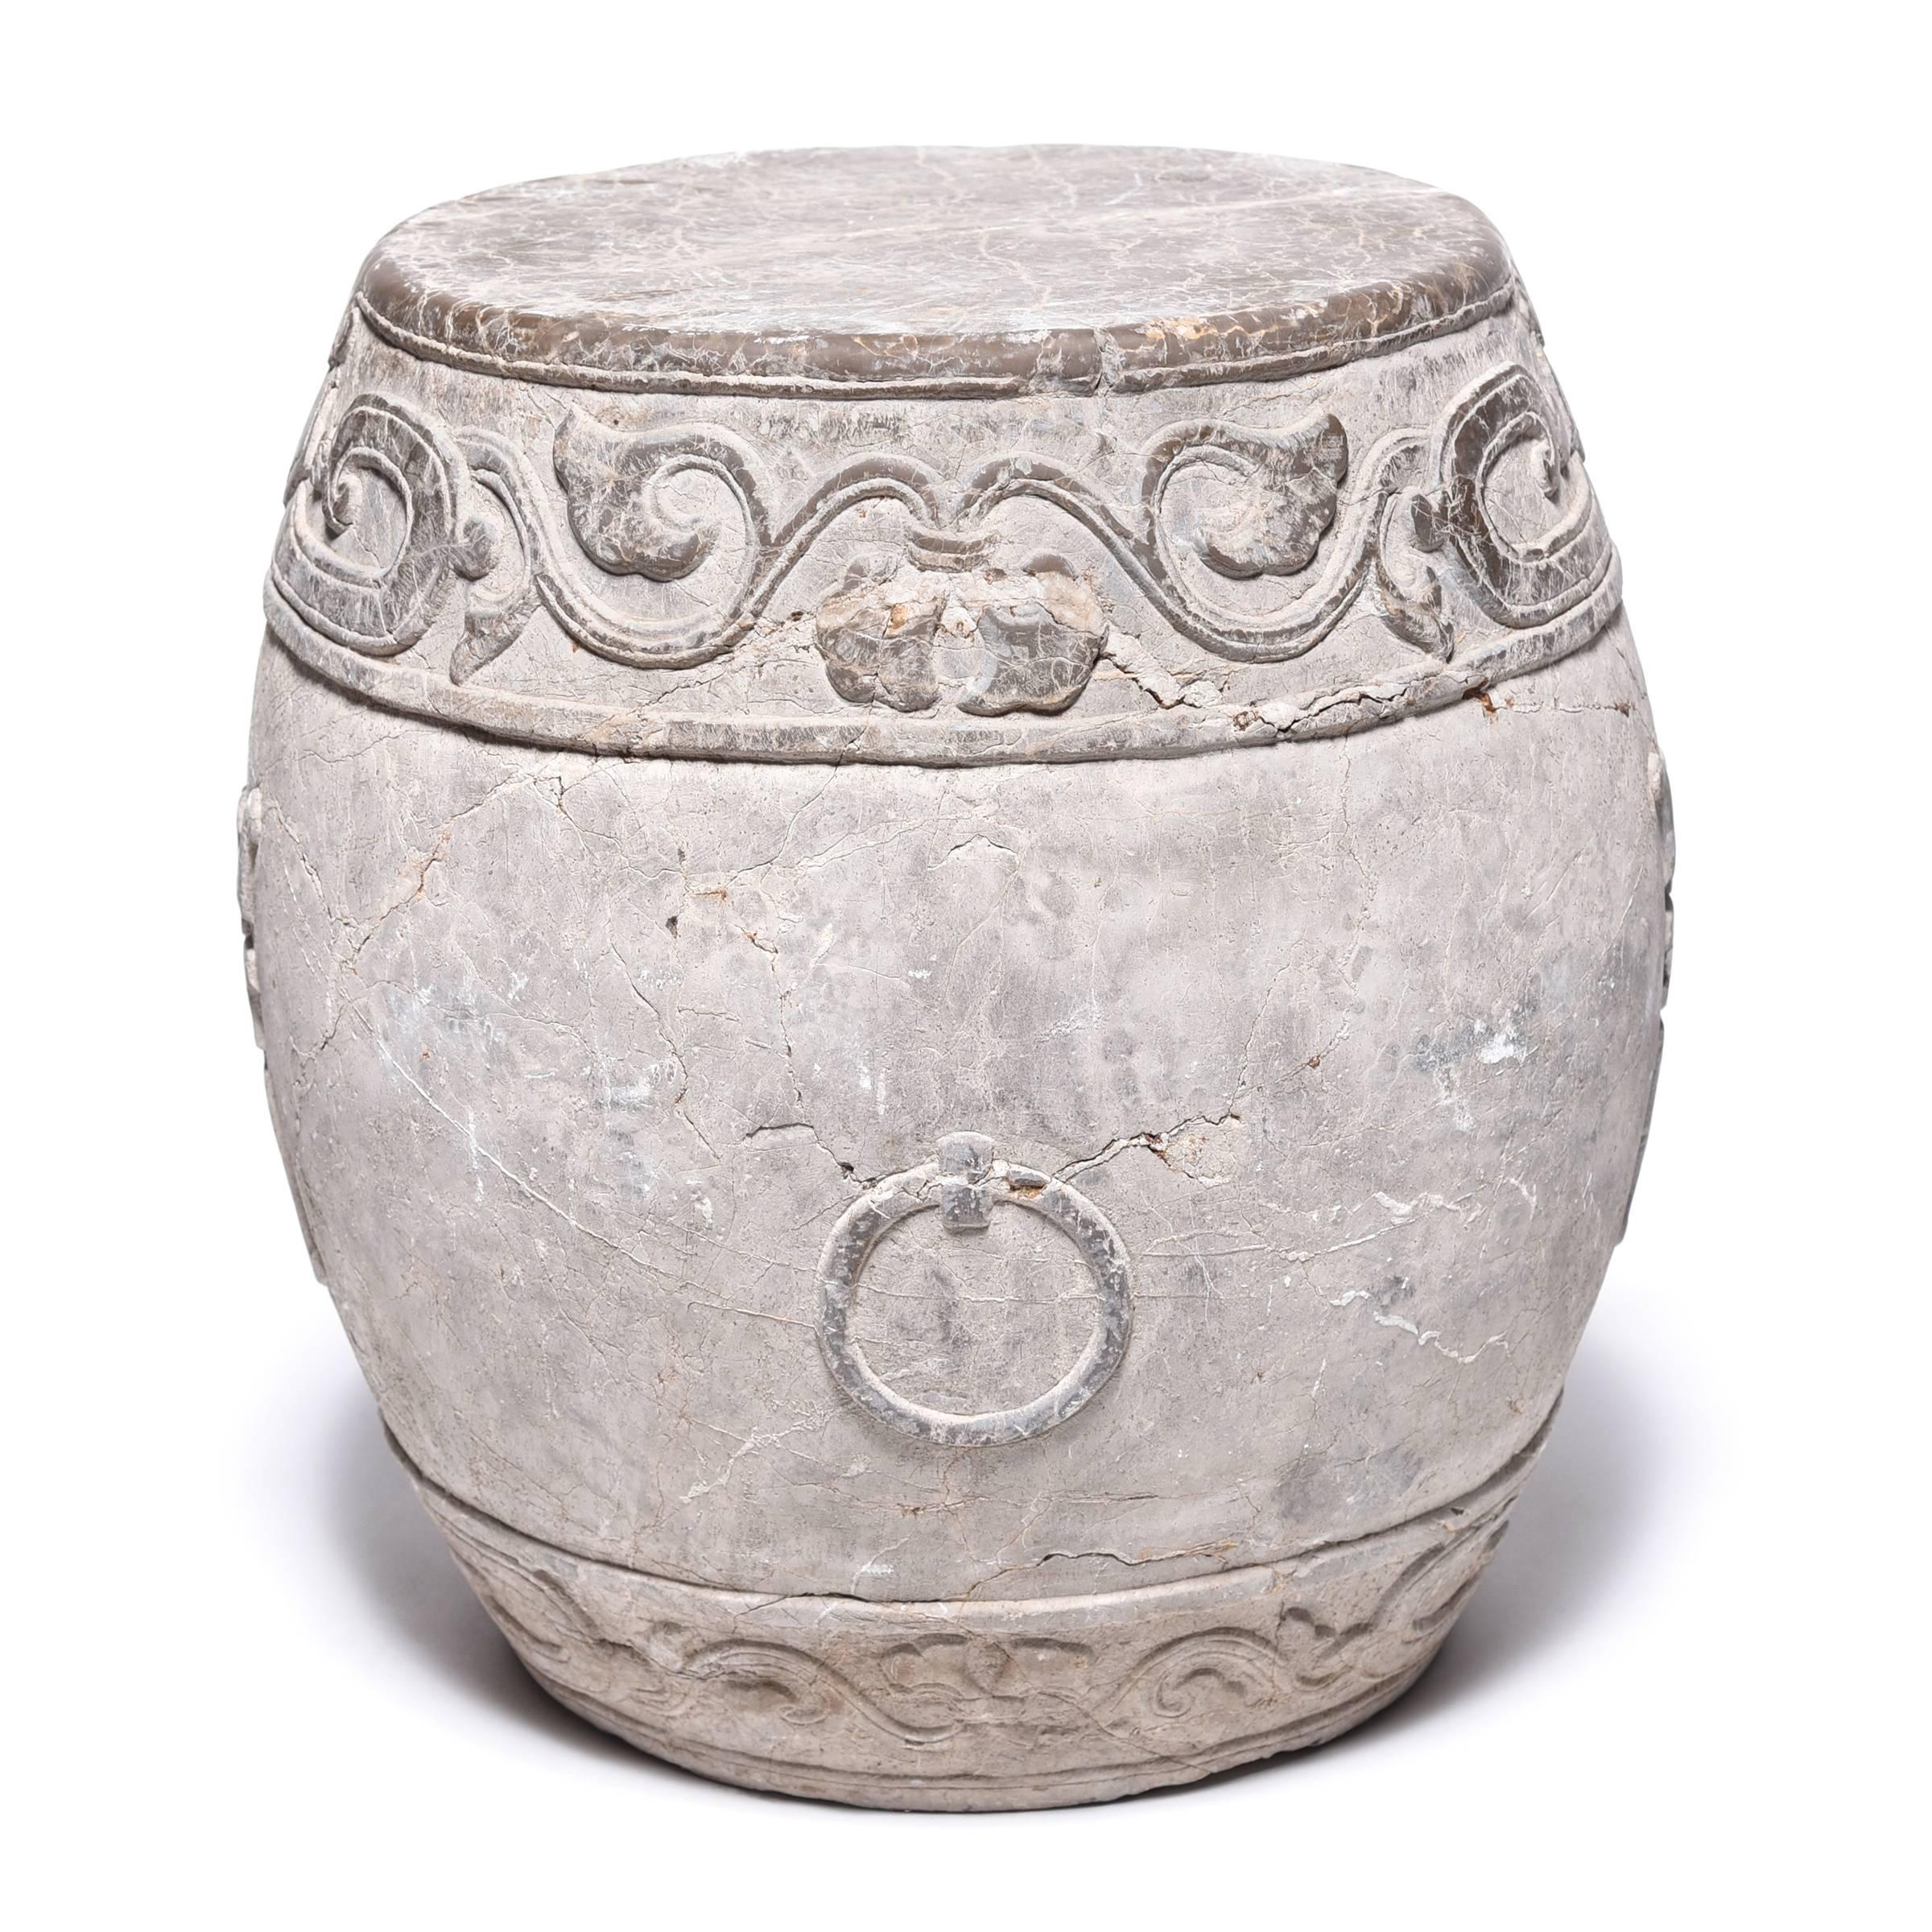 Made in Shanxi province, this venerable drum stone was hand-carved with a trailing vine motif and an auspicious “fu” character representing prosperity. The stone is lightly polished to accentuate the relief carvings and provide a smooth top for use